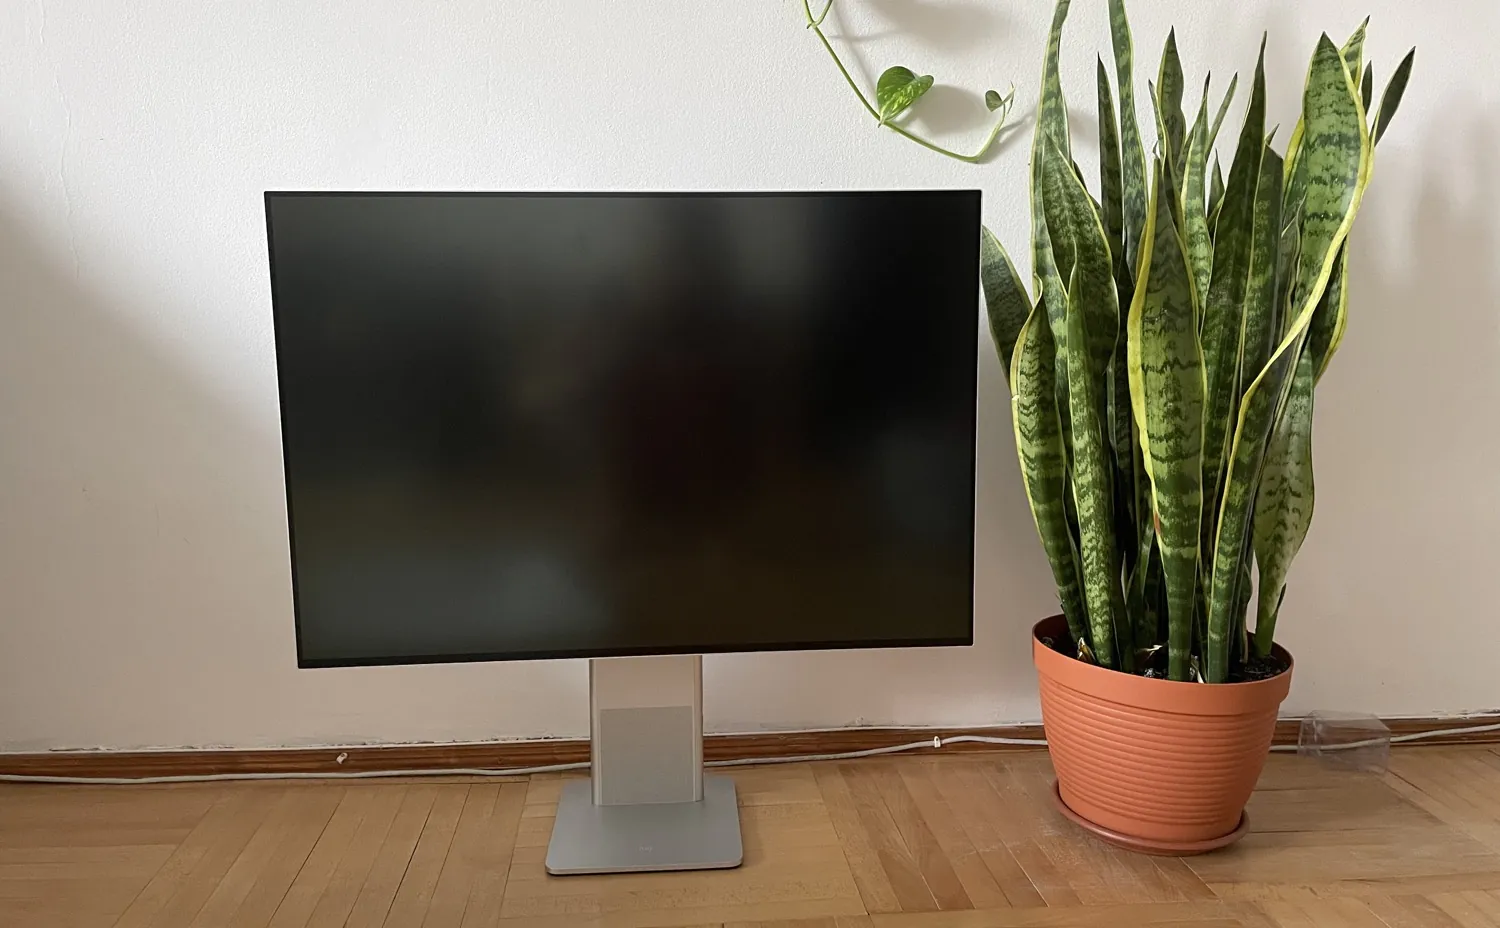 Huawei MateView monitor review: Good looks, and what else?